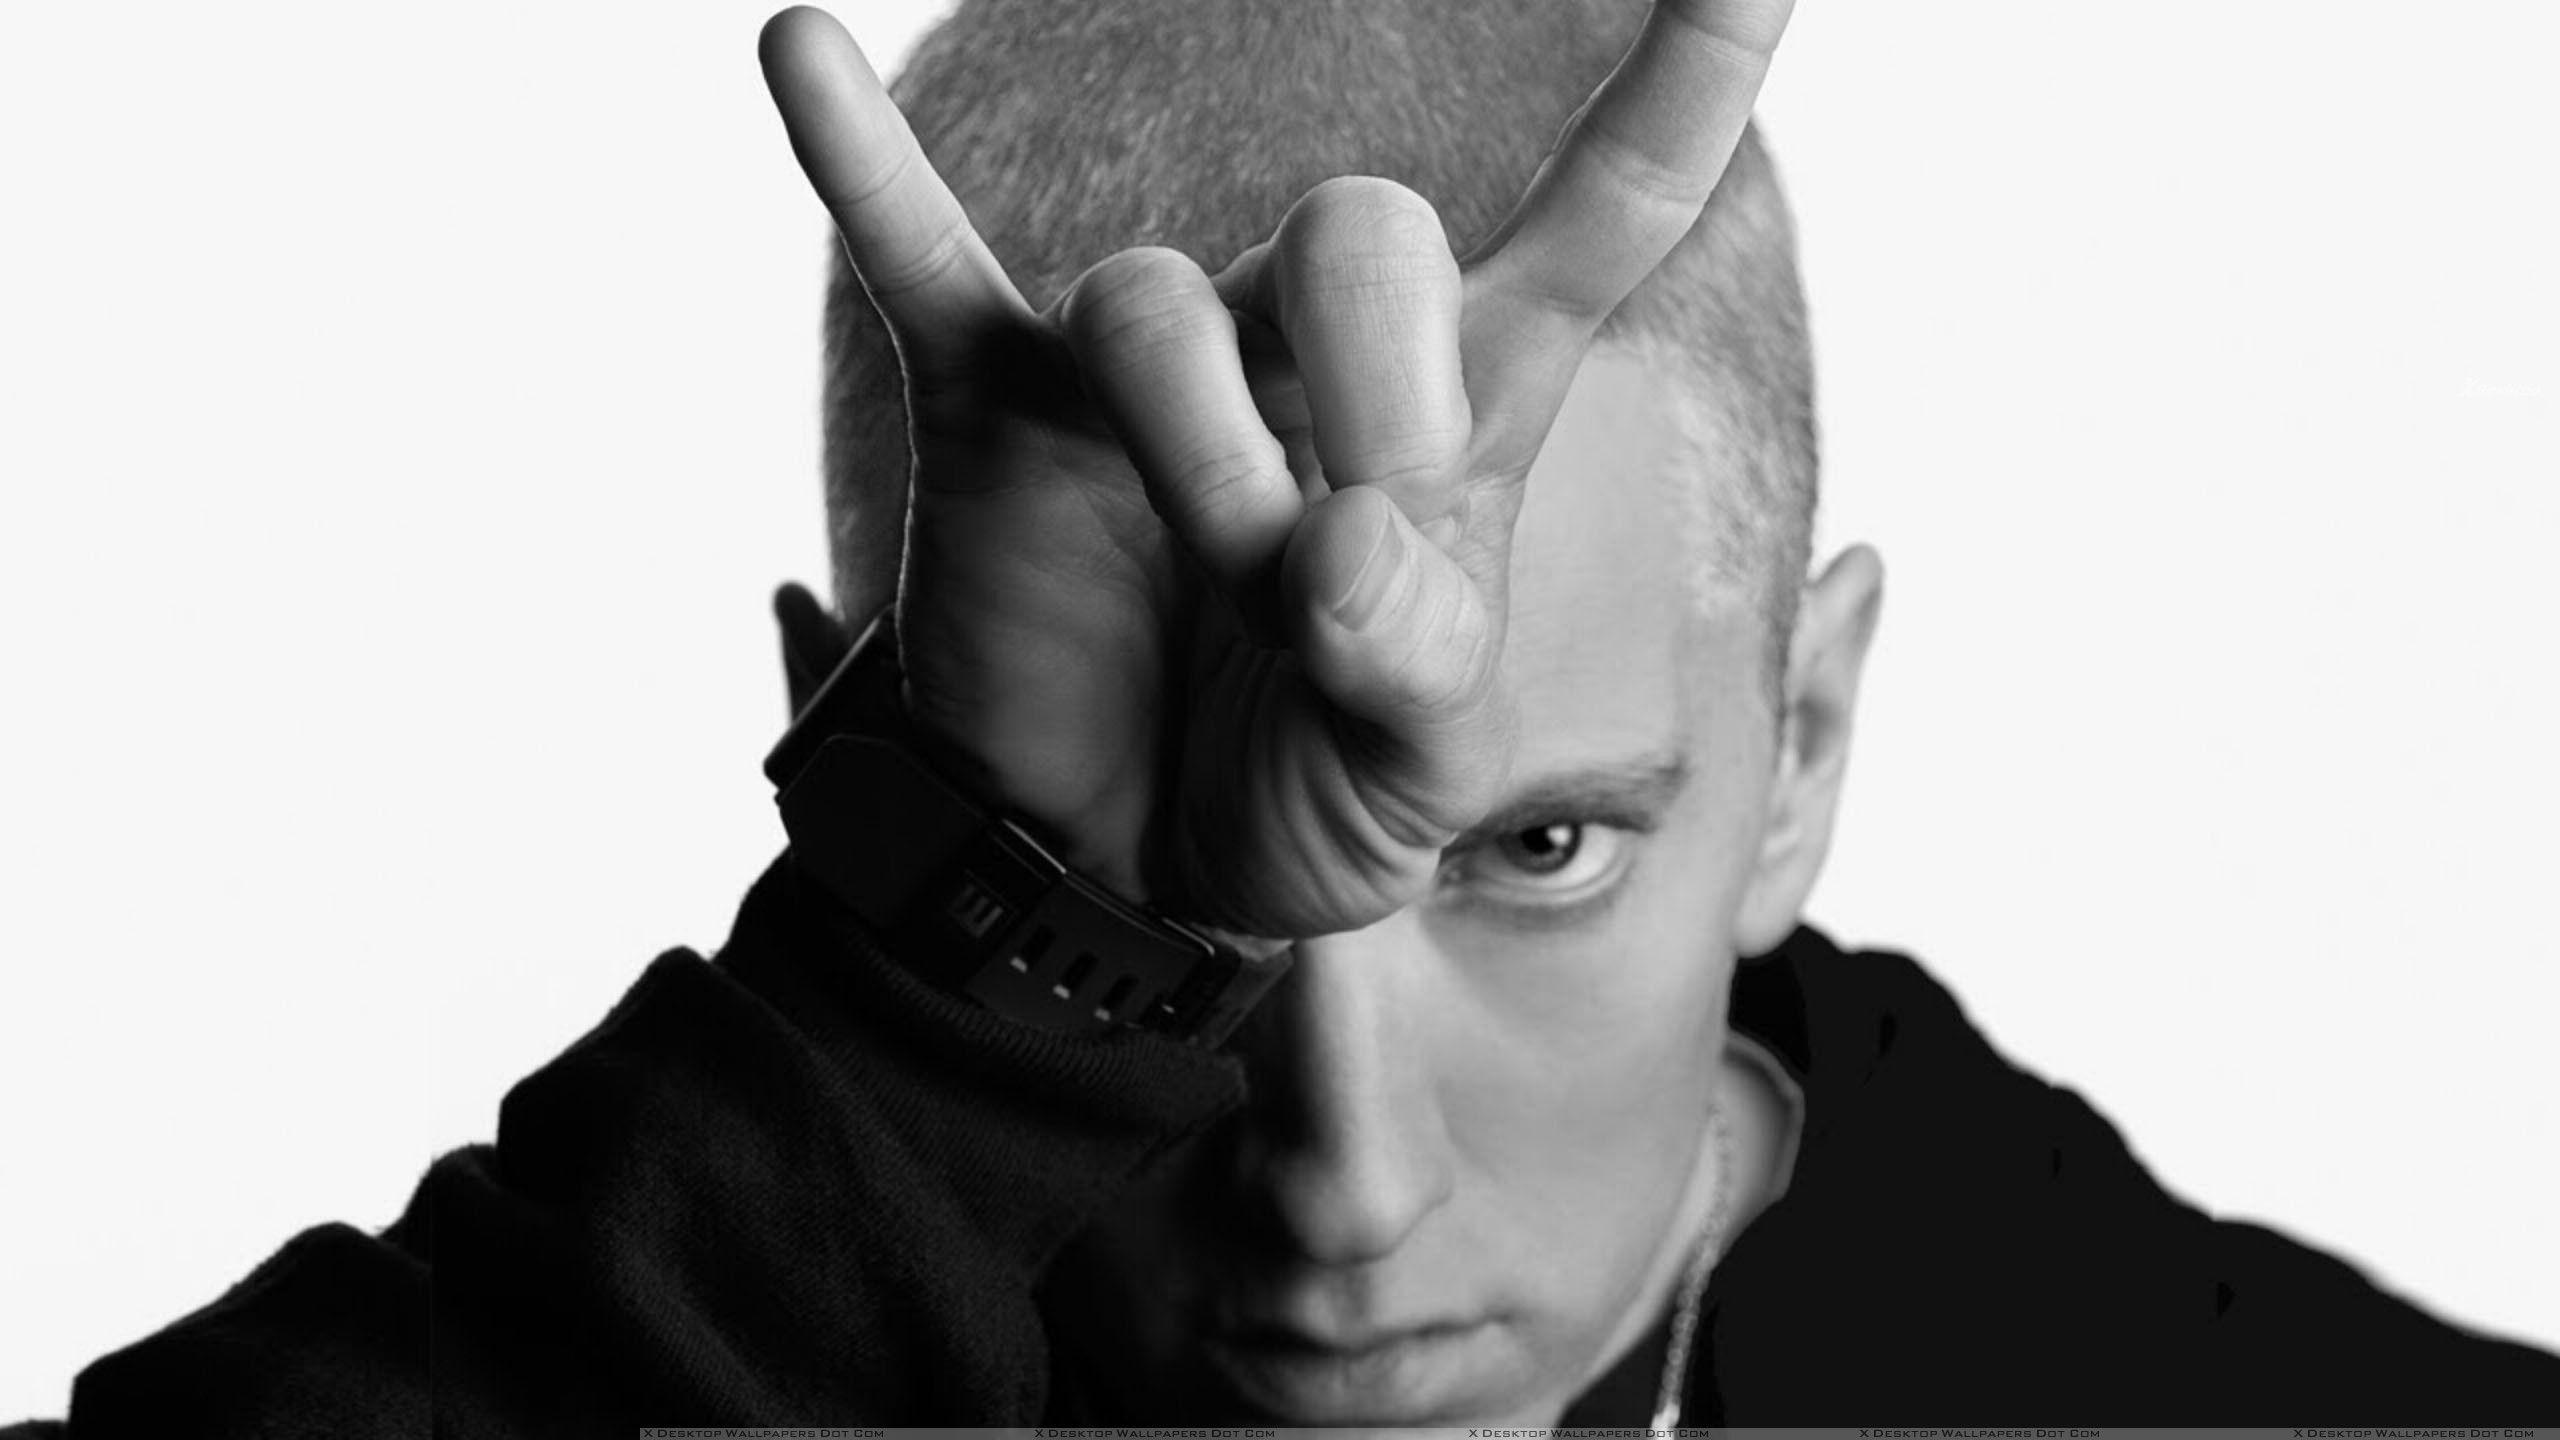 Eminem Angry Look Making Horns On Head Wallpaper